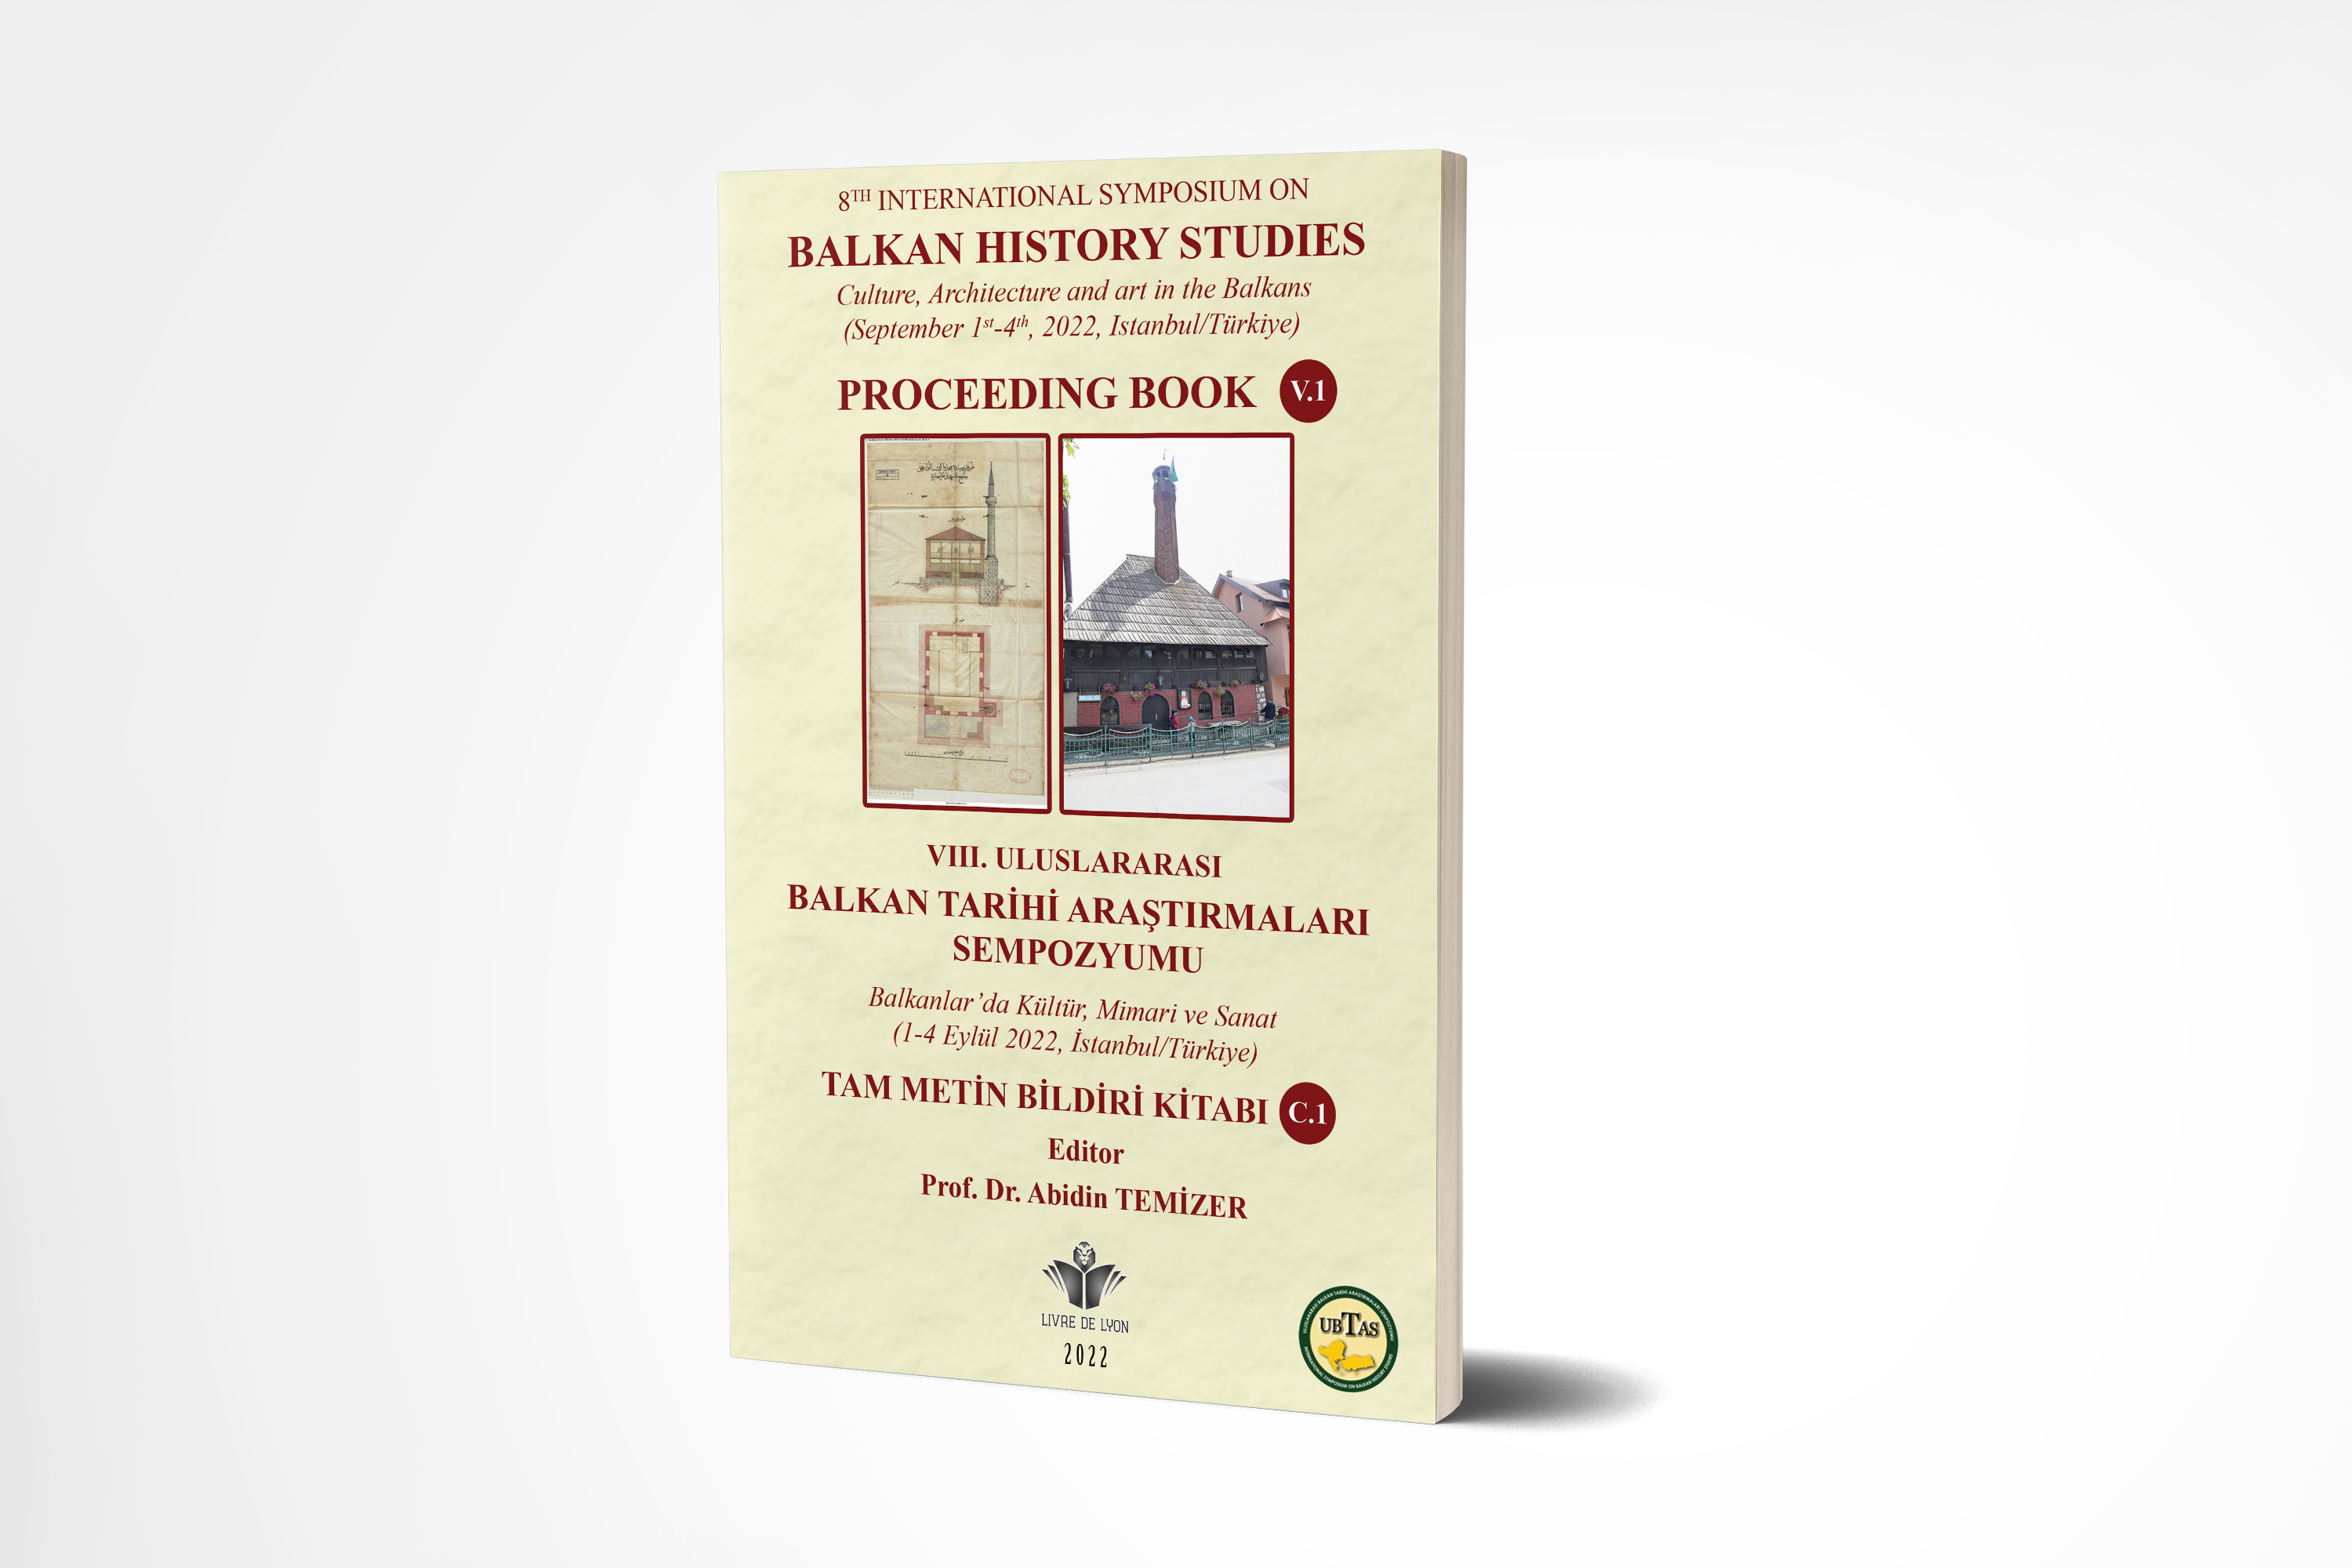 8th International Symposium on Balkan History Studies Culture, Architecture and Art in the Balkans,Proceeding Book, Vol. 1